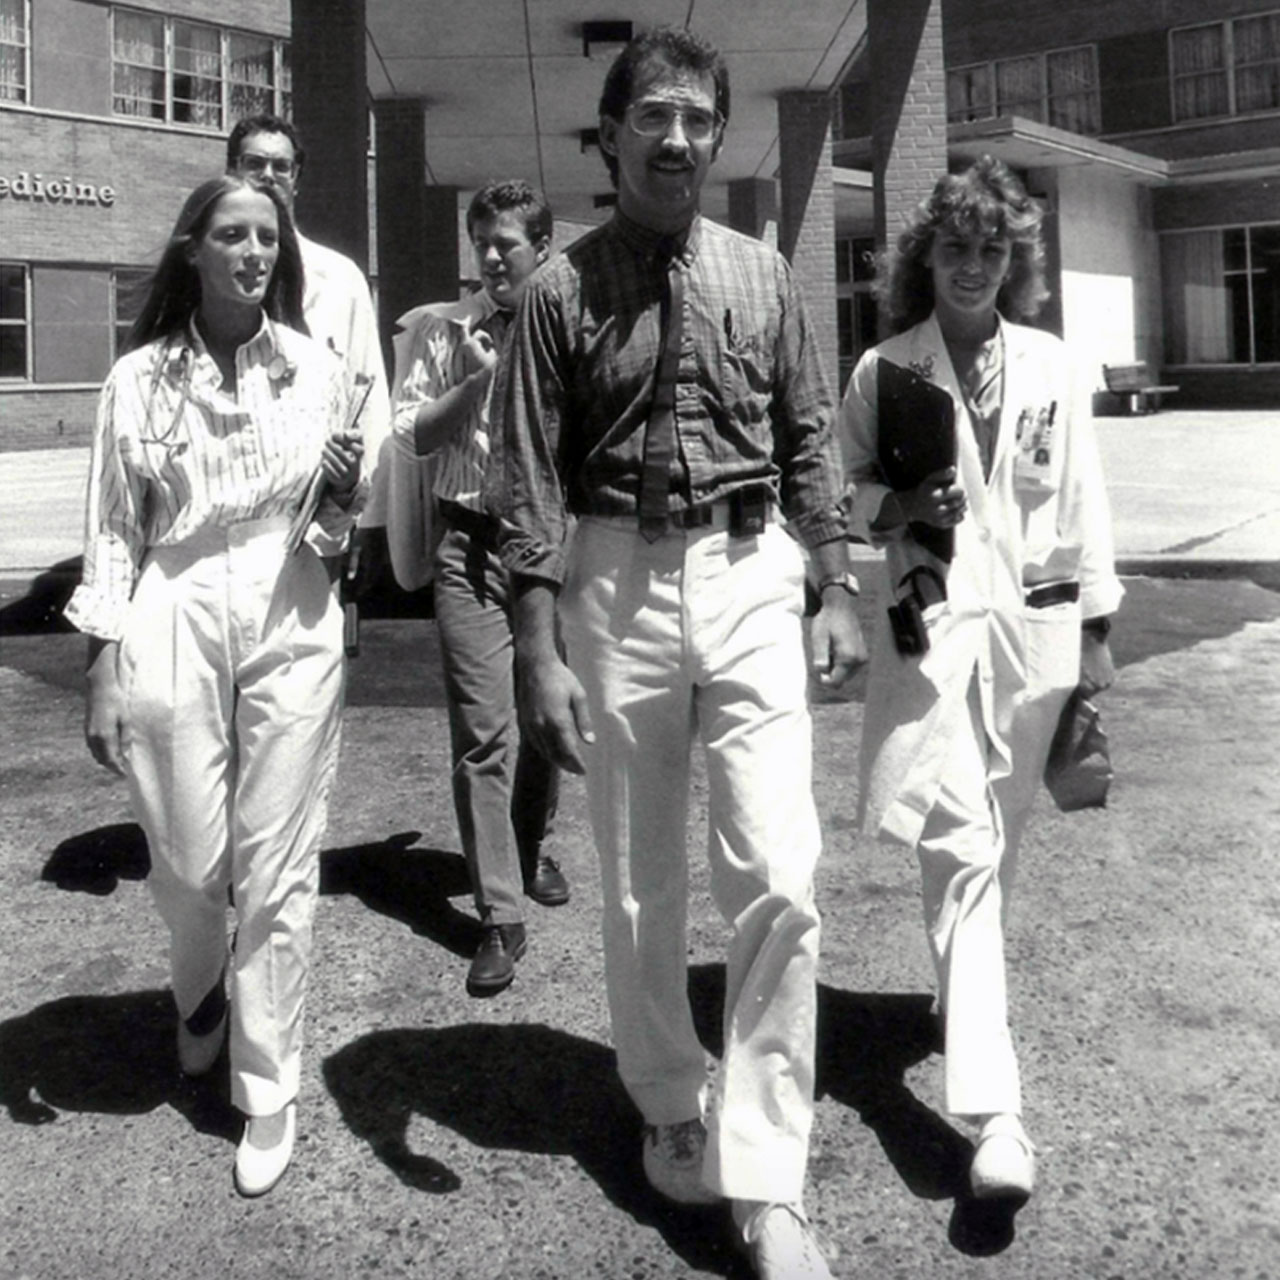 Black and white photo of PCOM residents and students walking out of the hospital building in the 1970s